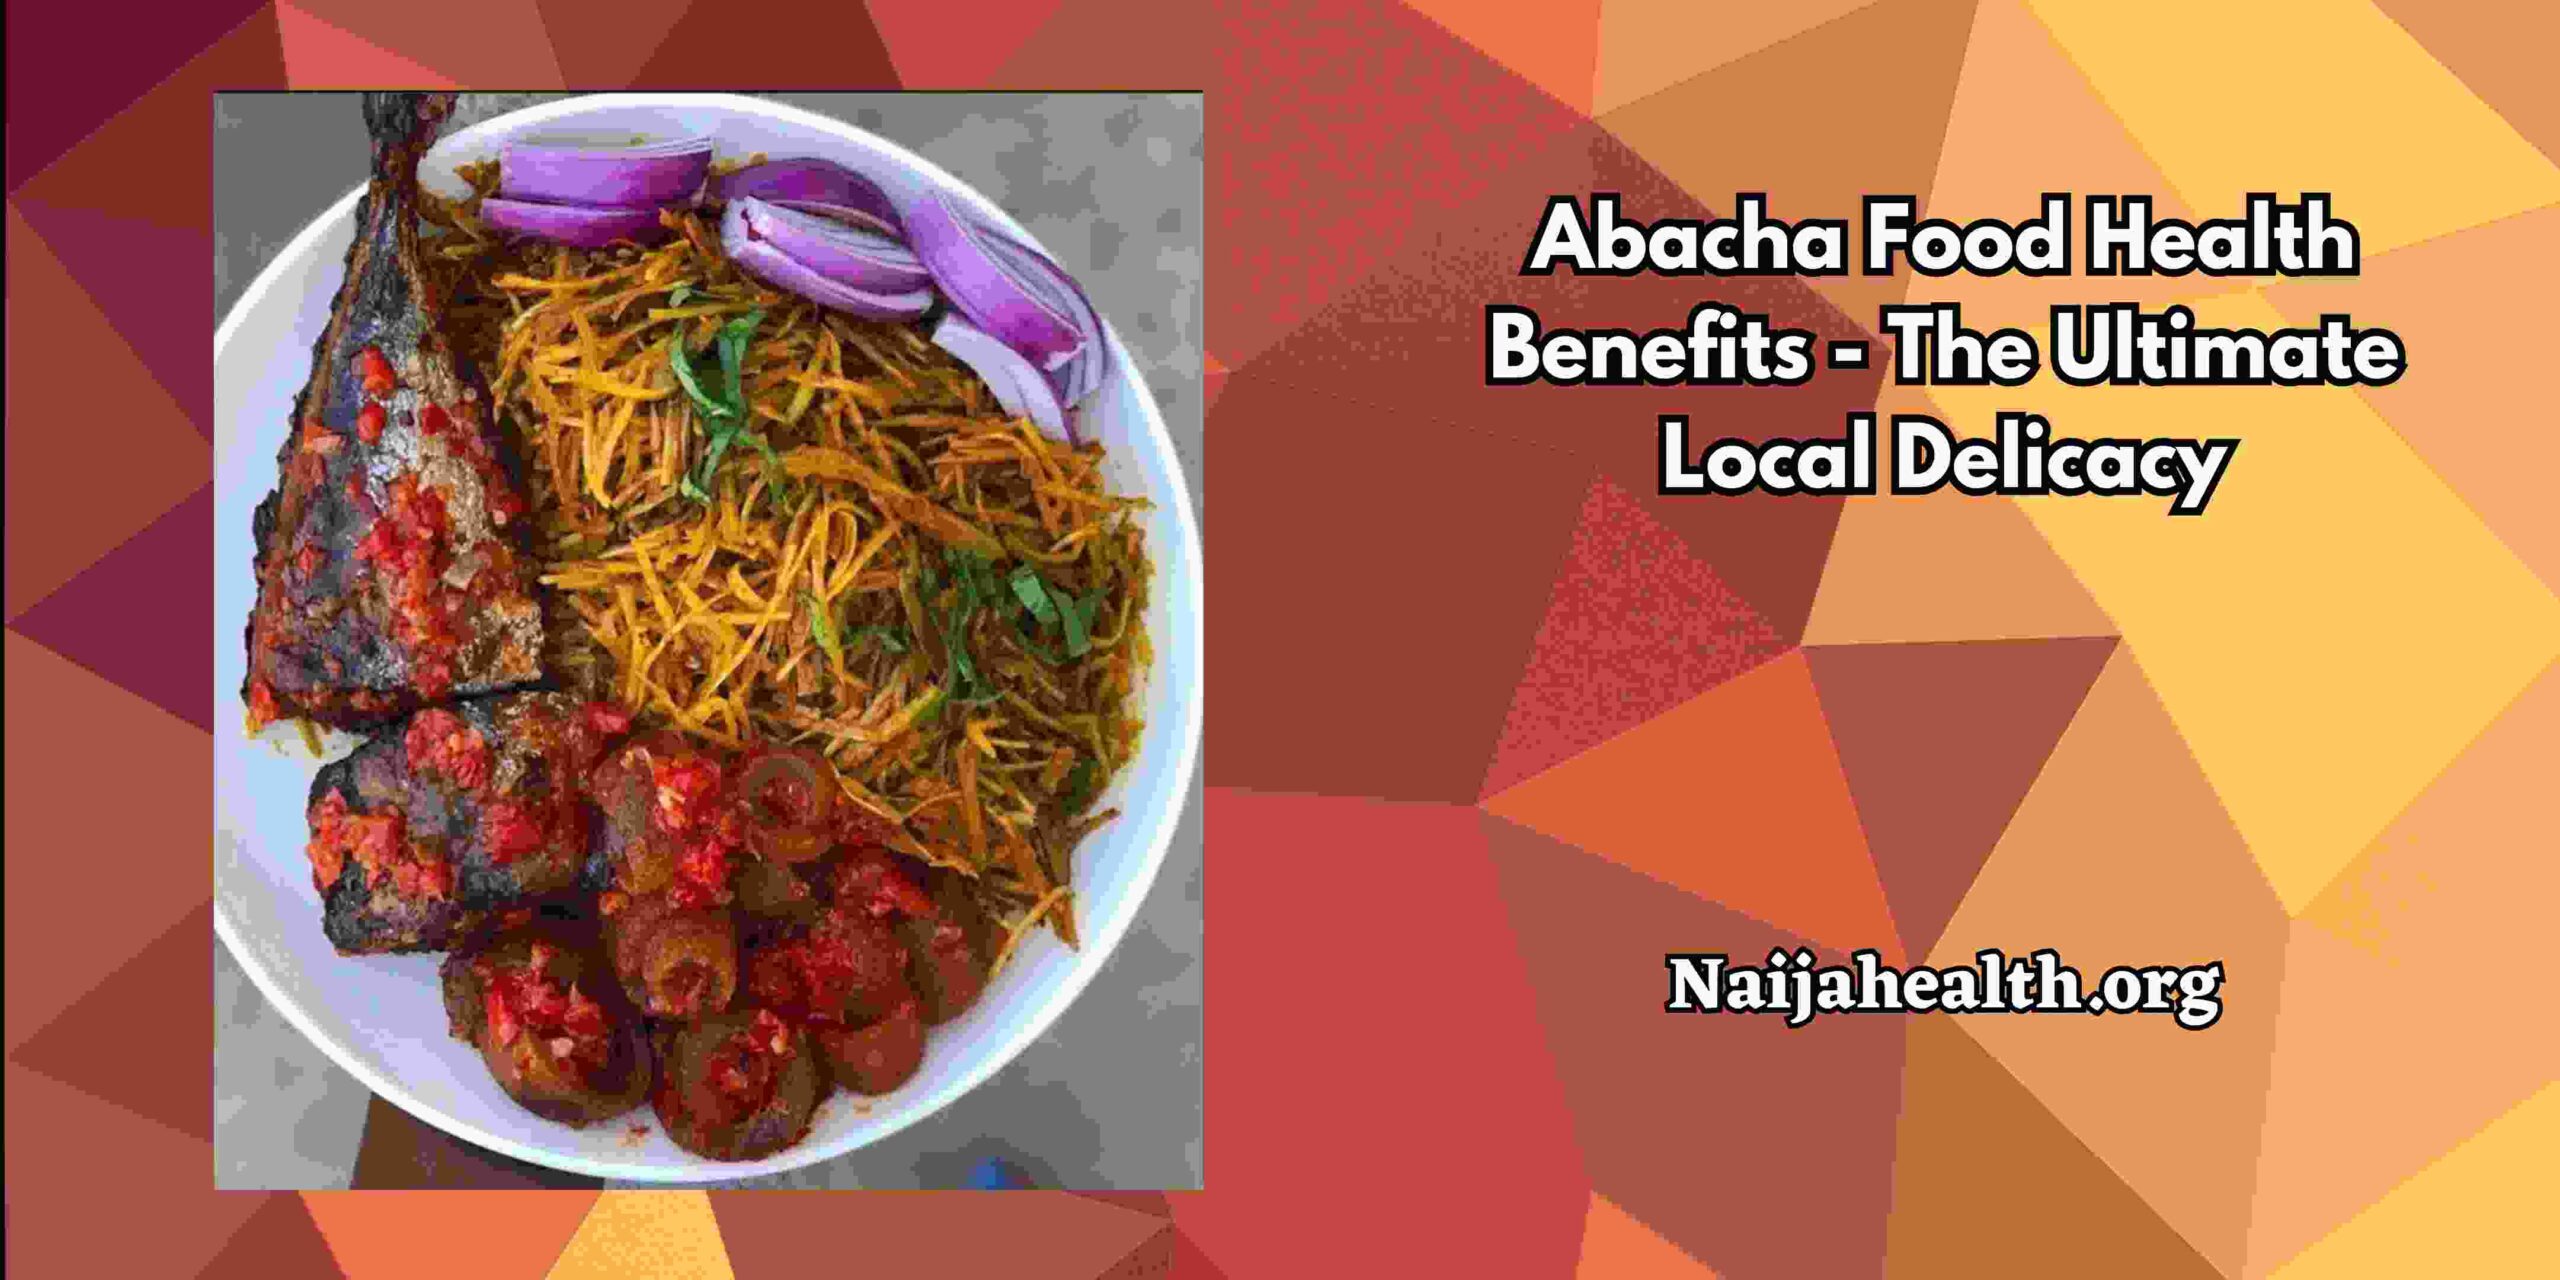 Abacha Food Health Benefits - The Ultimate Local Delicacy